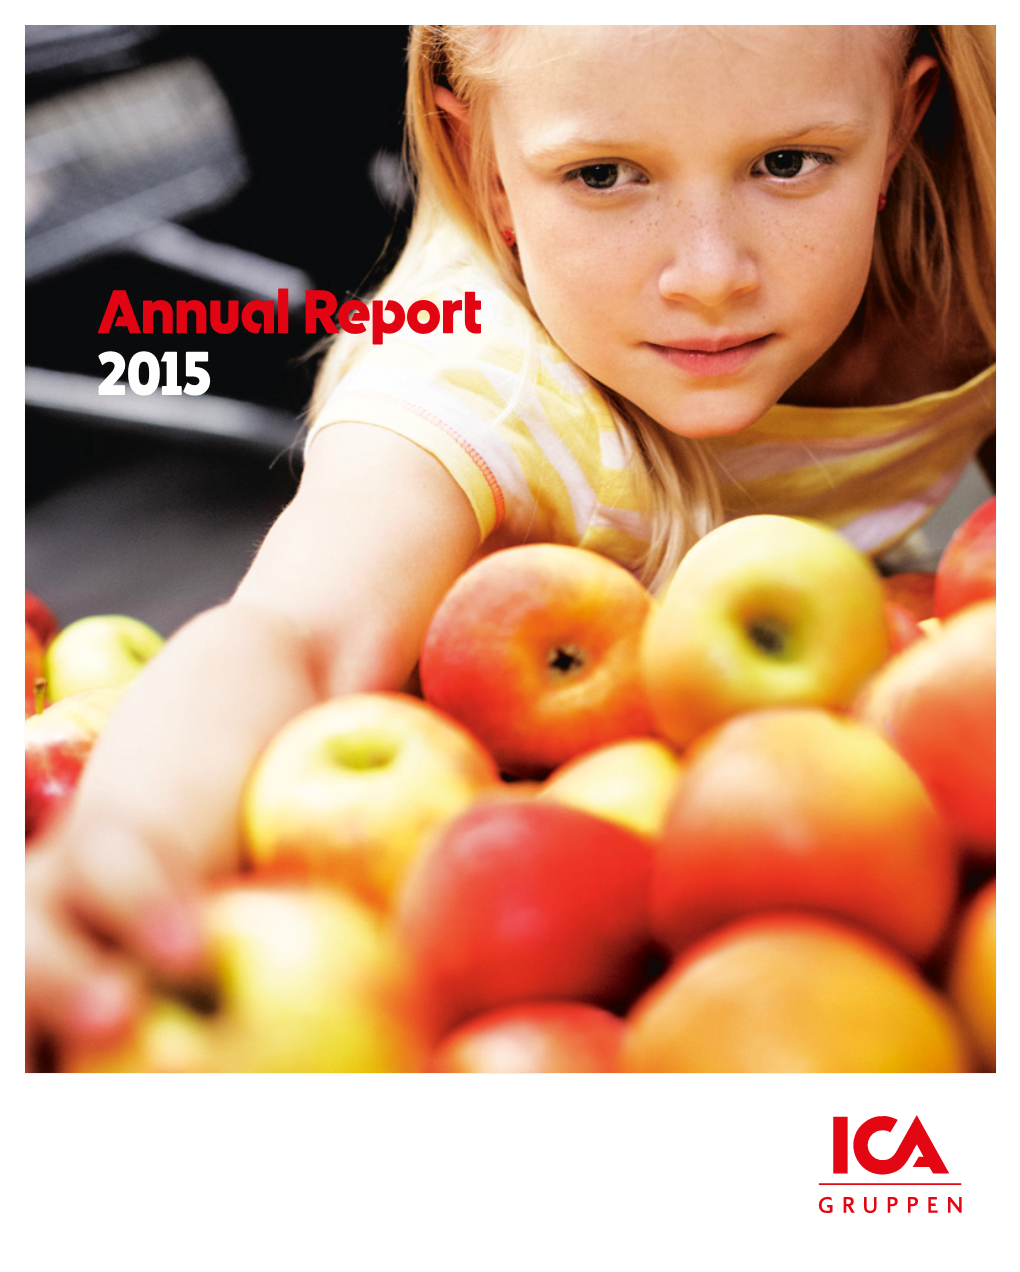 Annual Report 2015 Contents Overview This Is This Is ICA Gruppen 1 the Year in Summary 2 B CEO’S Comments 4 Trends and Business Environment 6 B ICA Gruppen